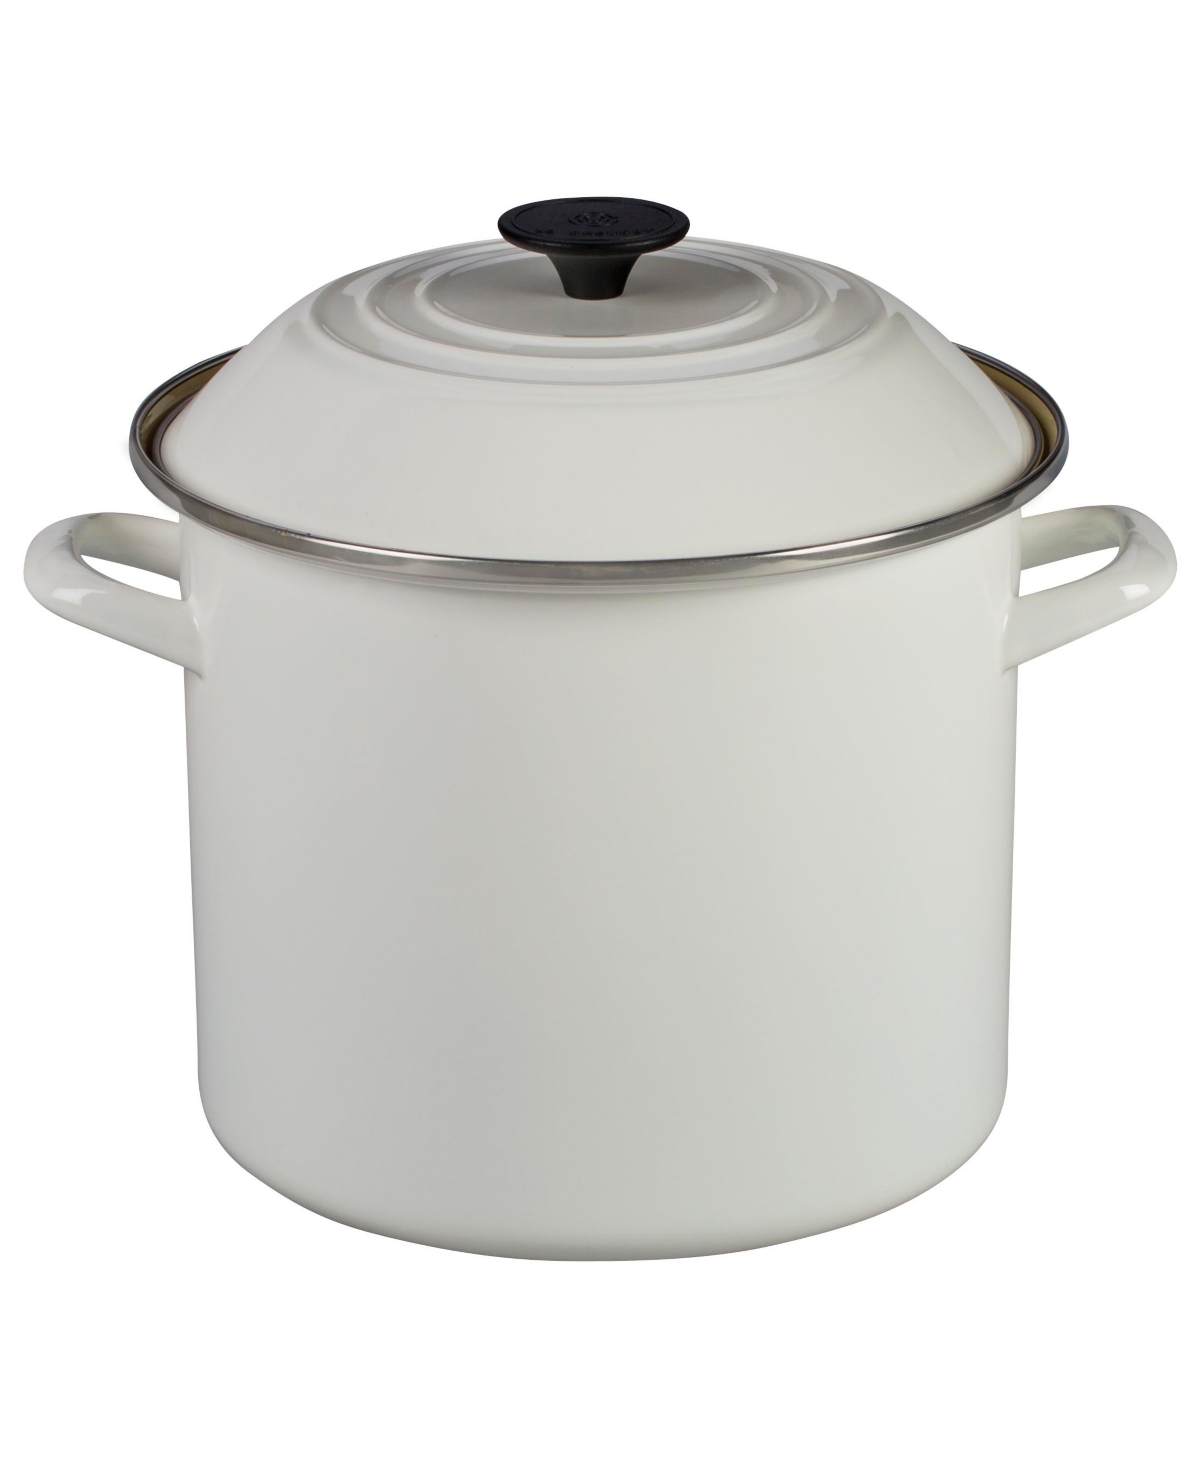 Le Creuset 10 Quart Enamel On Steel Stock Pot With Lid In White